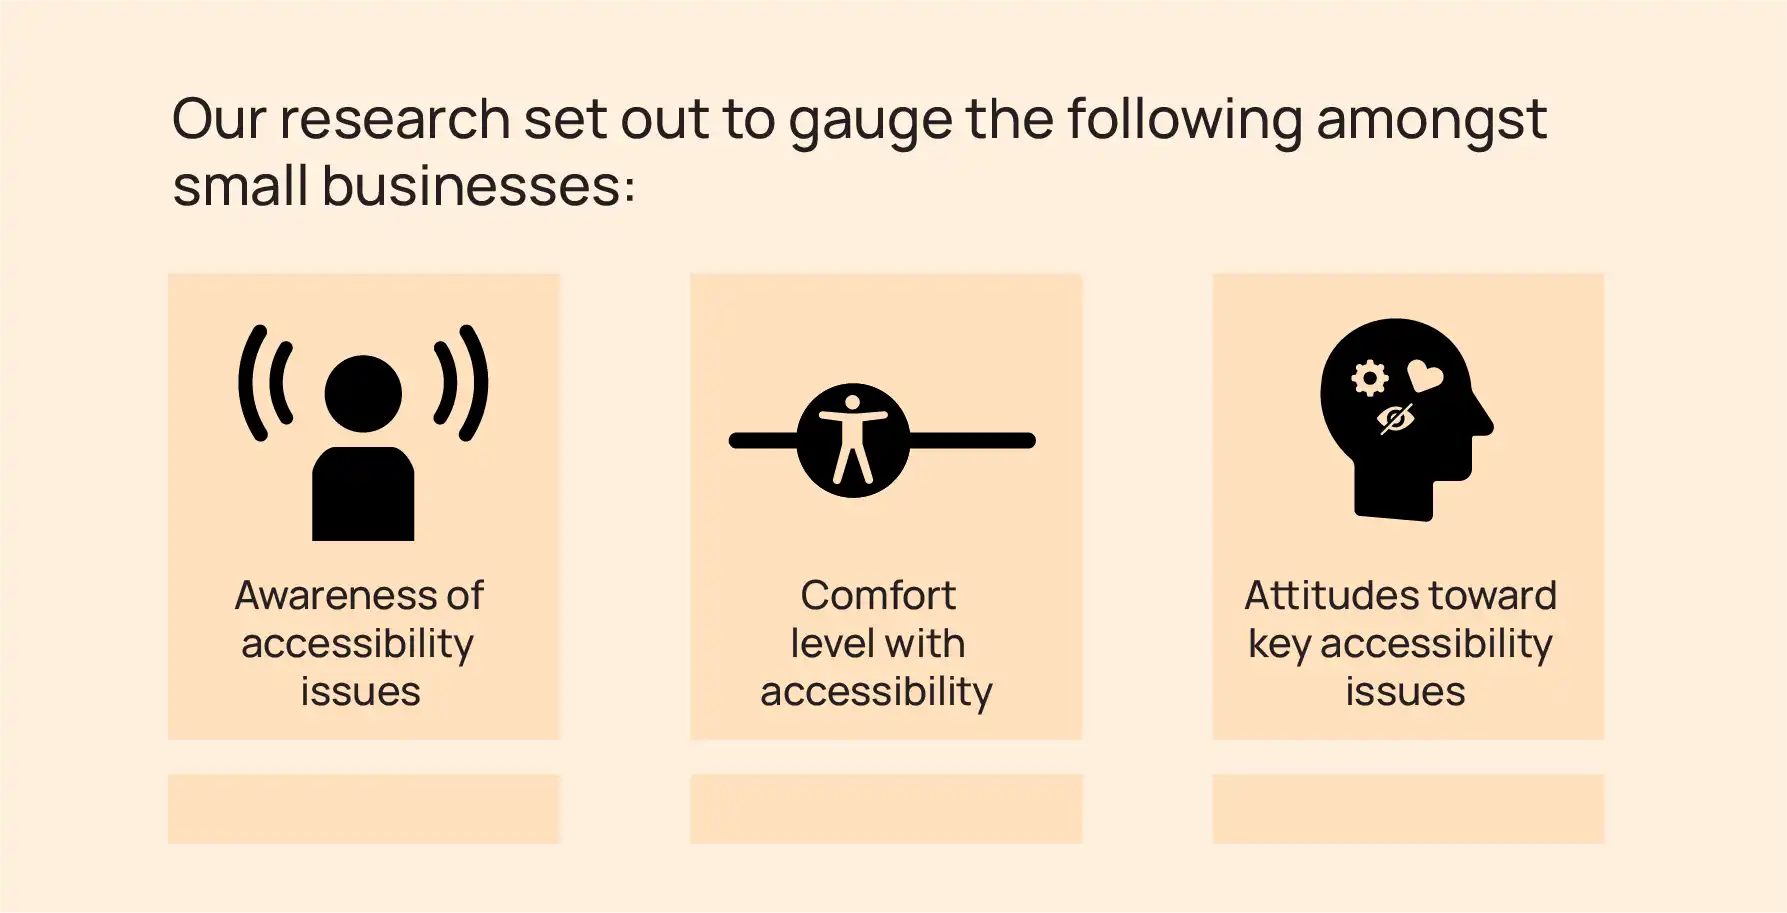 A graphic with icons that show what our research set out to find; awareness of accessibility issues, comfort level with accessibility, and attitudes toward key accessibility issues.